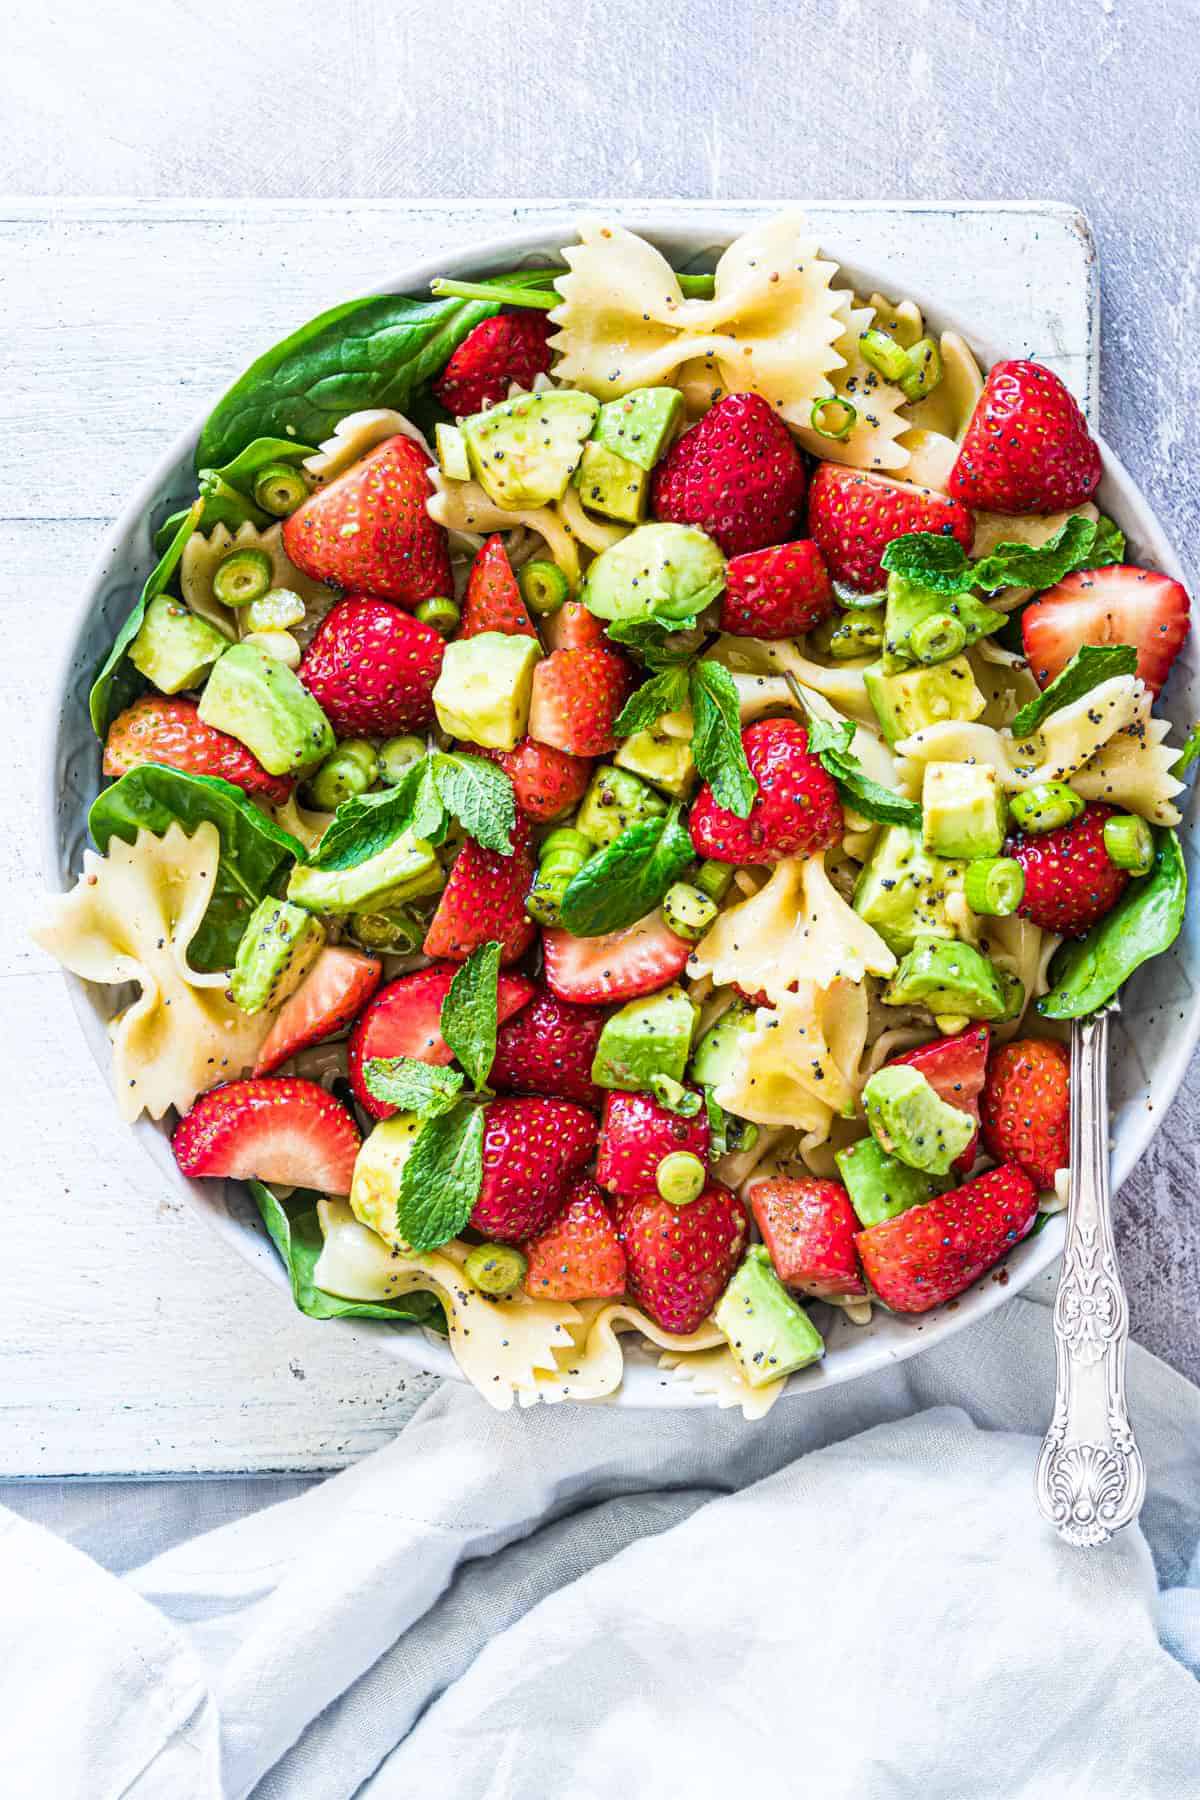 pasta salad with avocado and strawberries.